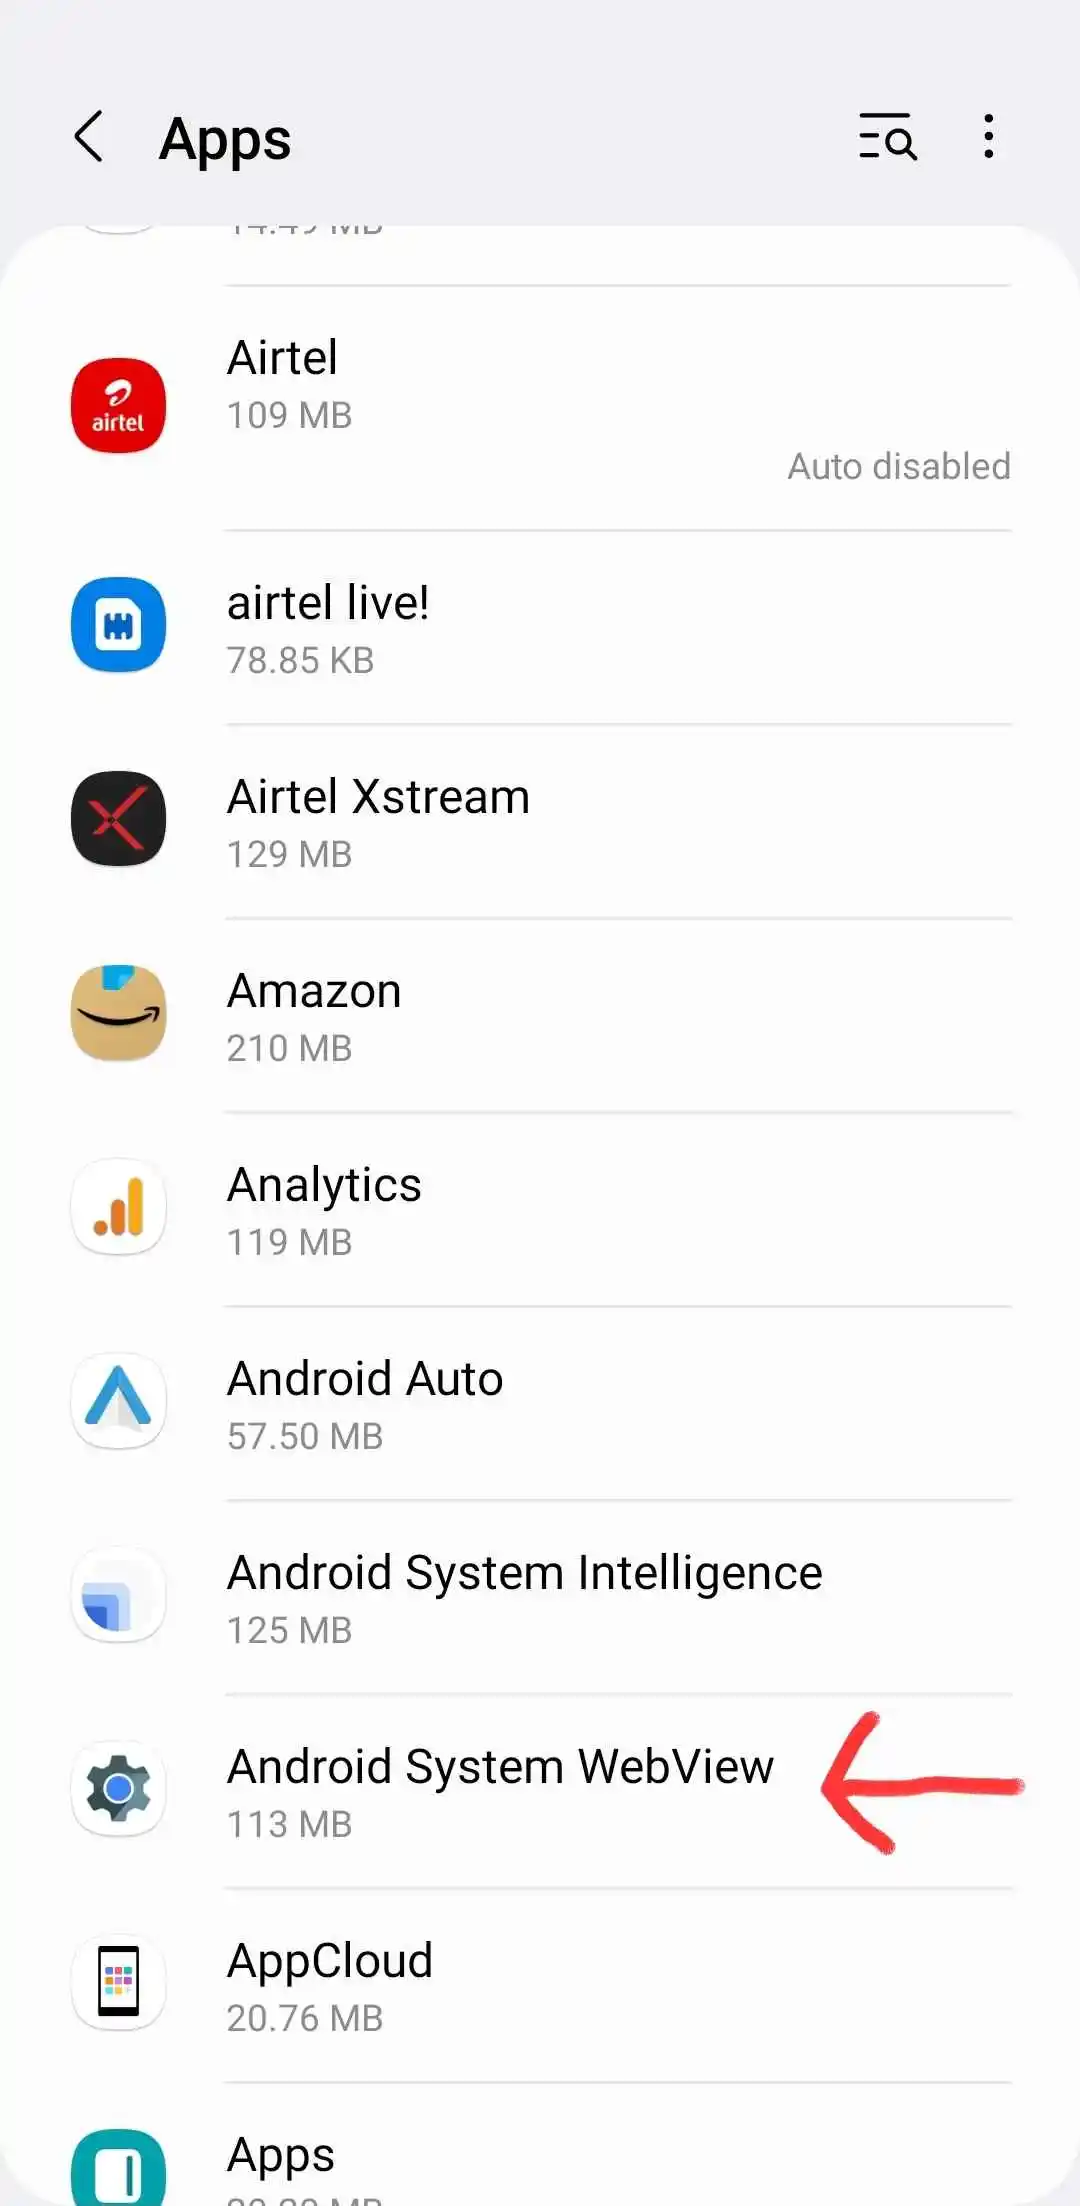 Selecting Android System WebView from Apps list from the device settings